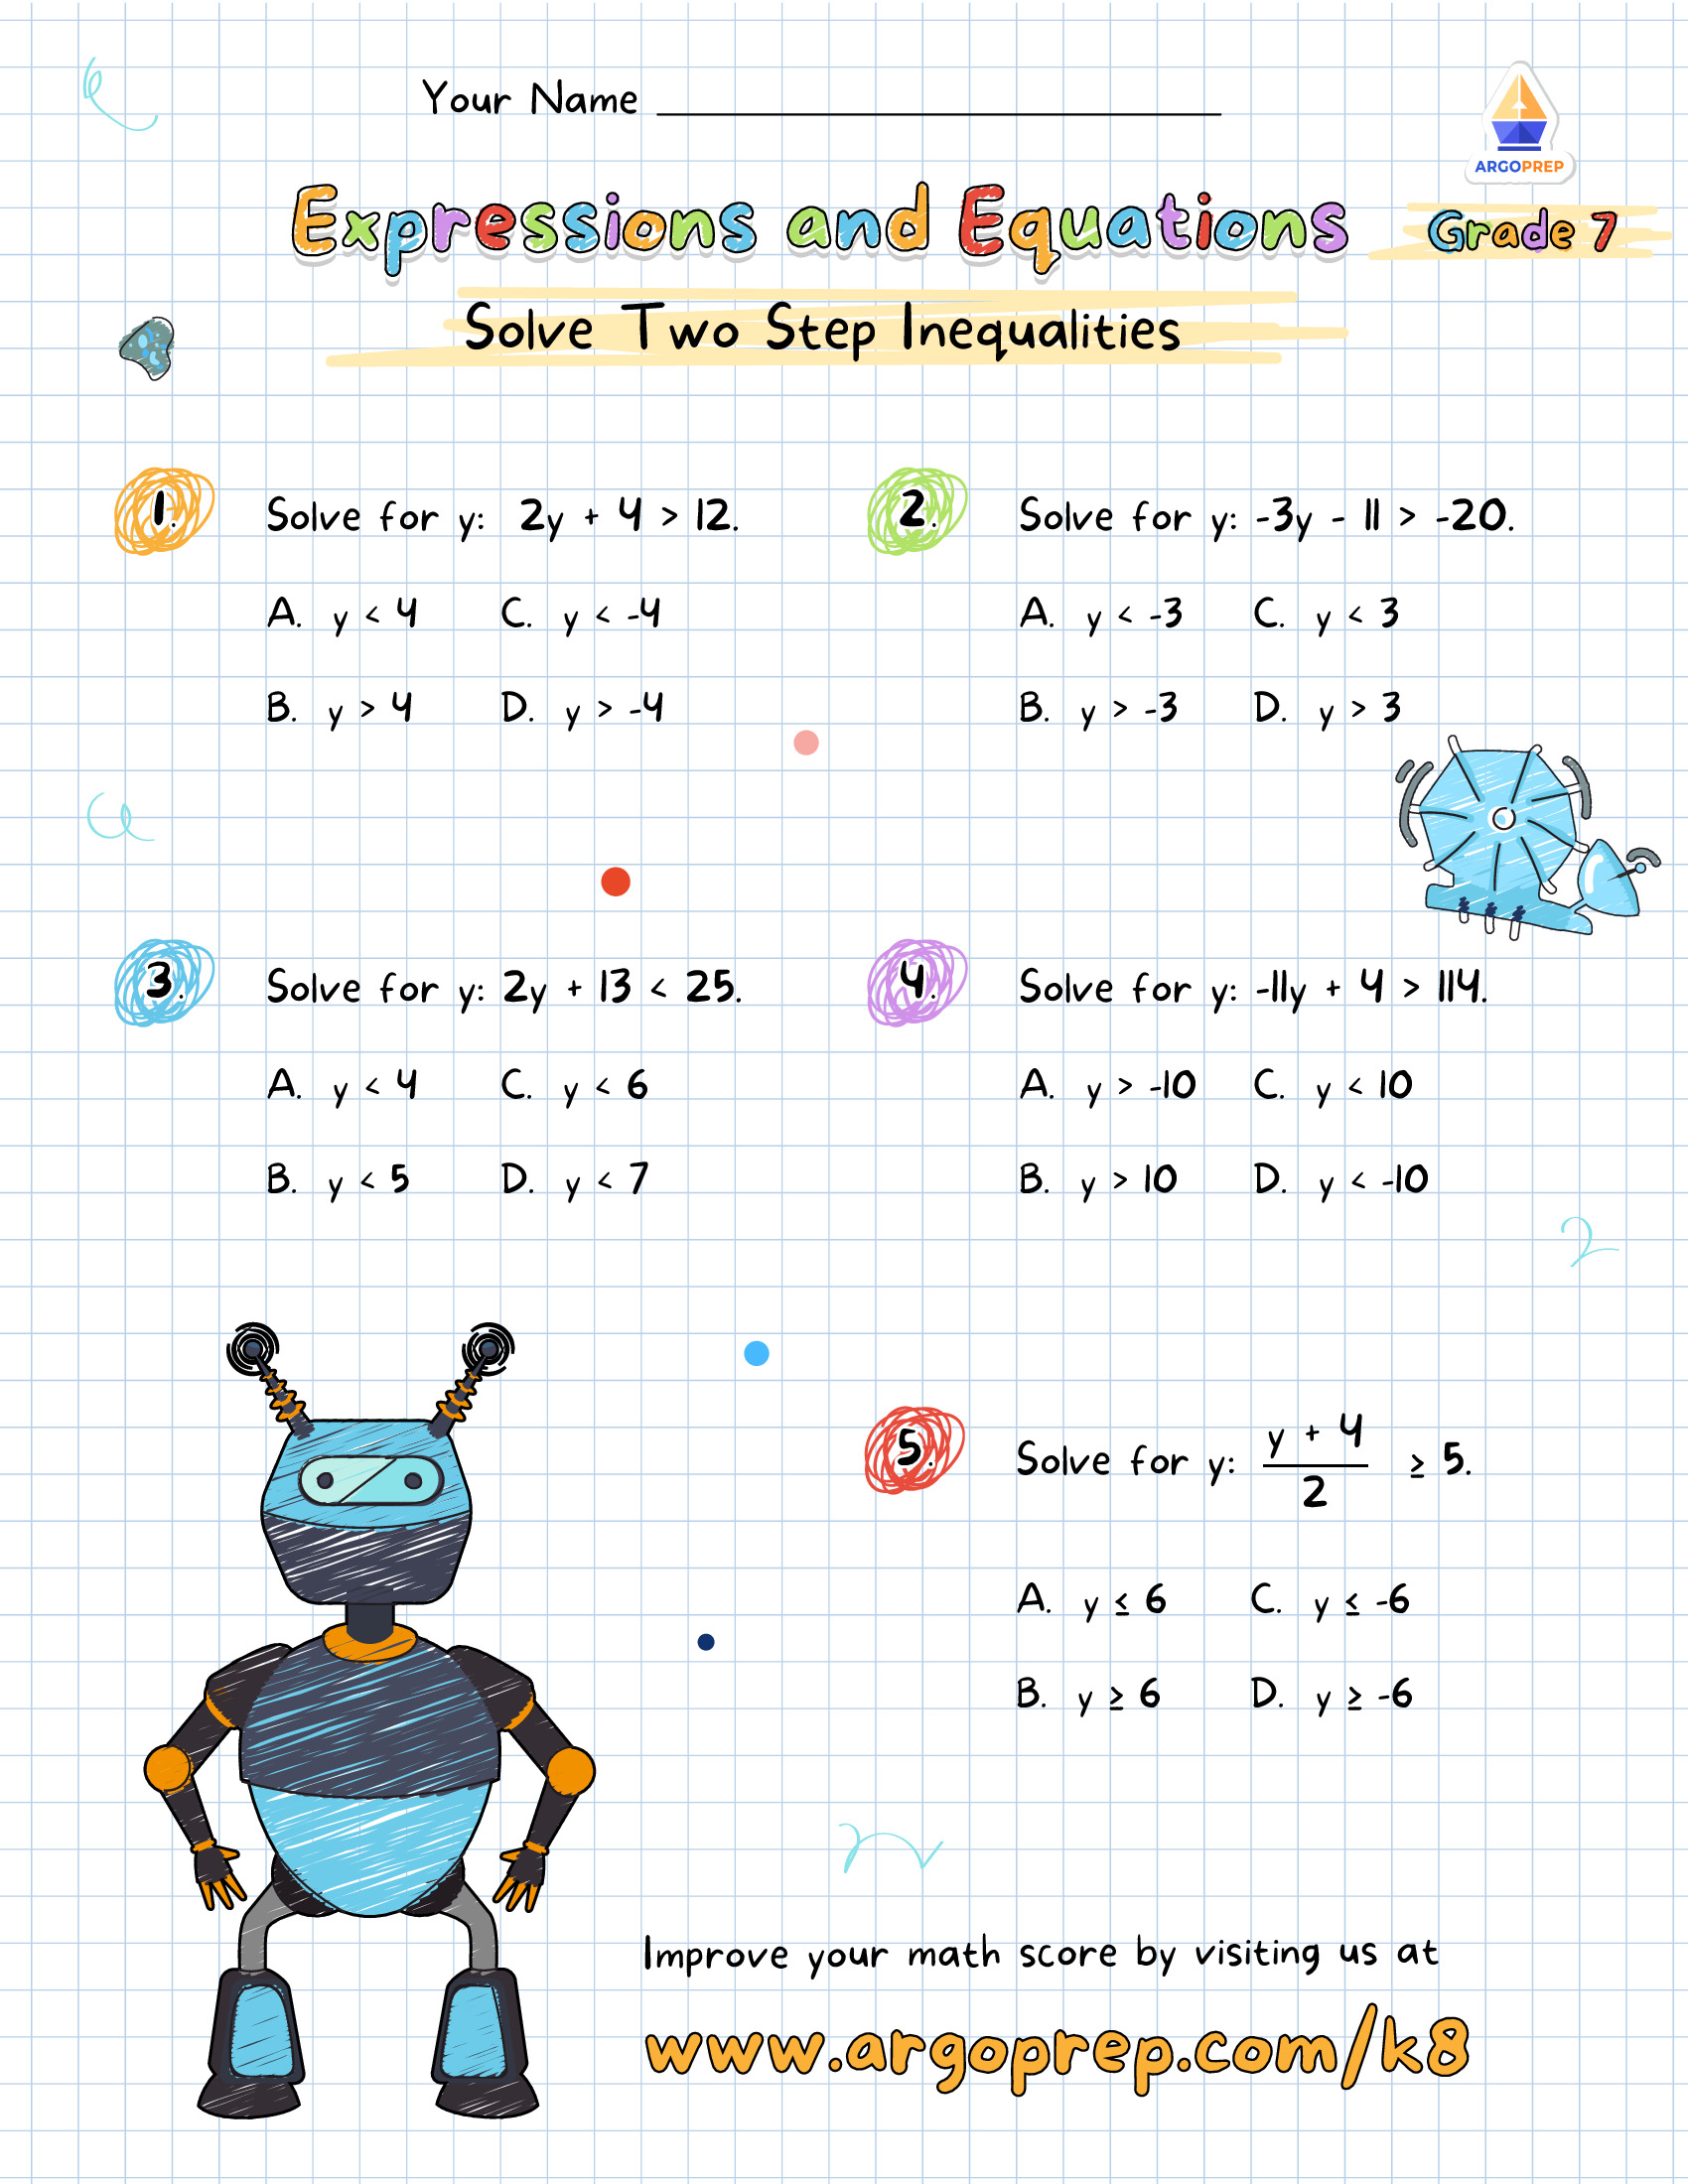 Robot Ready for Two Step Inequalities - ArgoPrep Throughout Solving Two Step Inequalities Worksheet